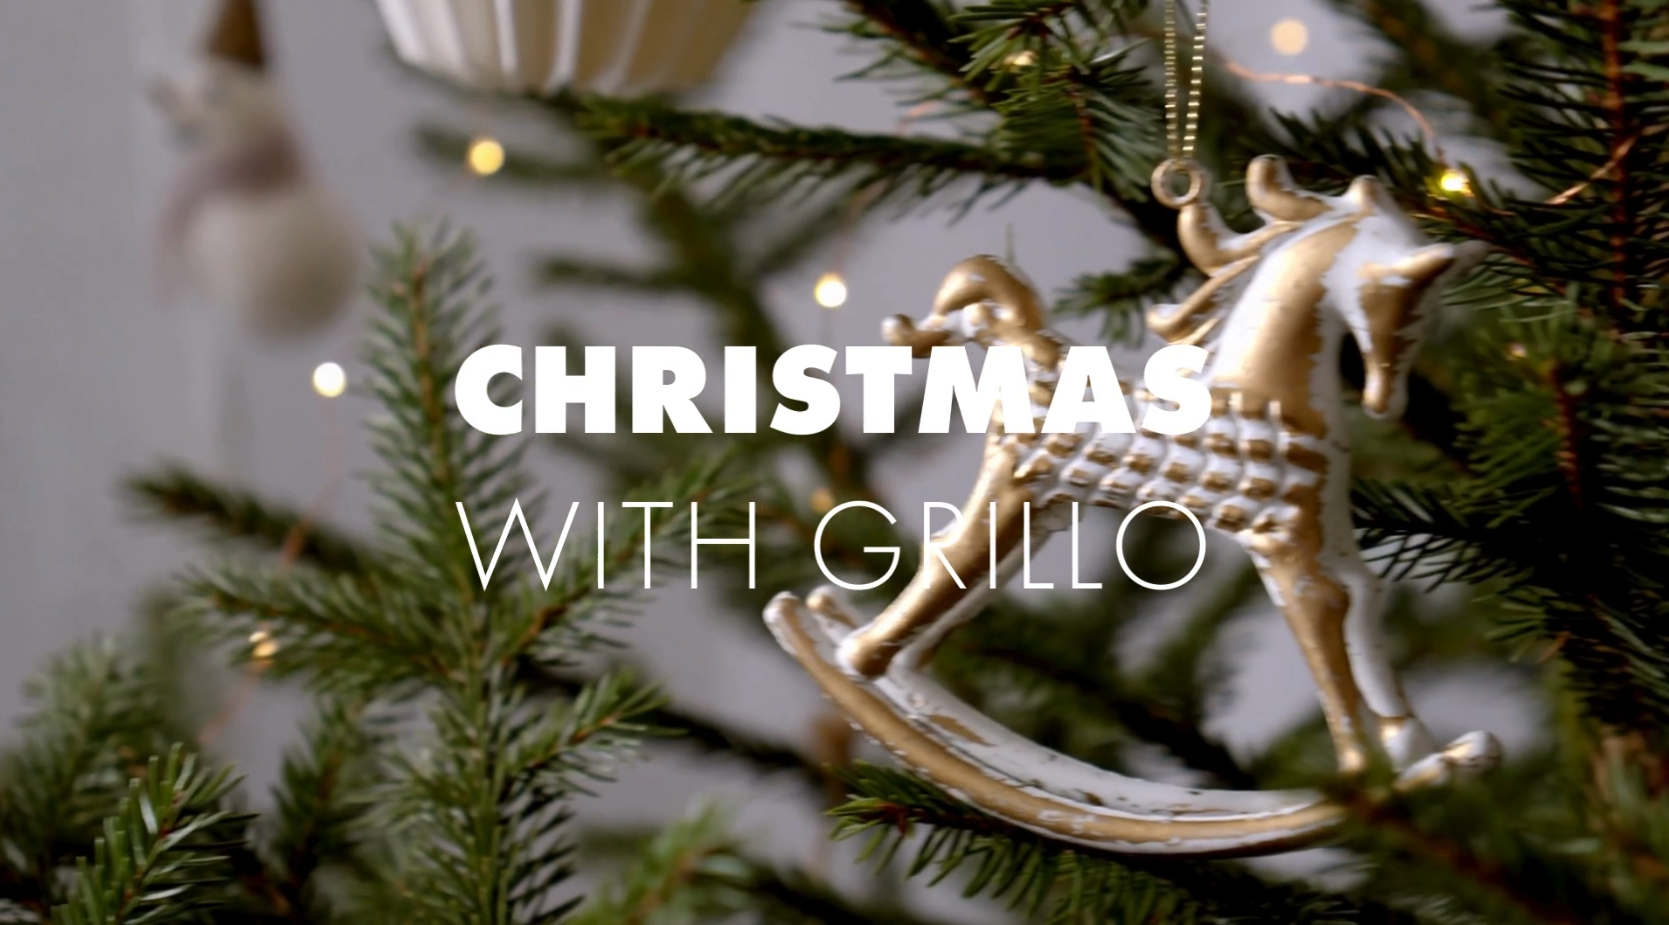 Christmas & GRILLO: Watch our new Christmas video now